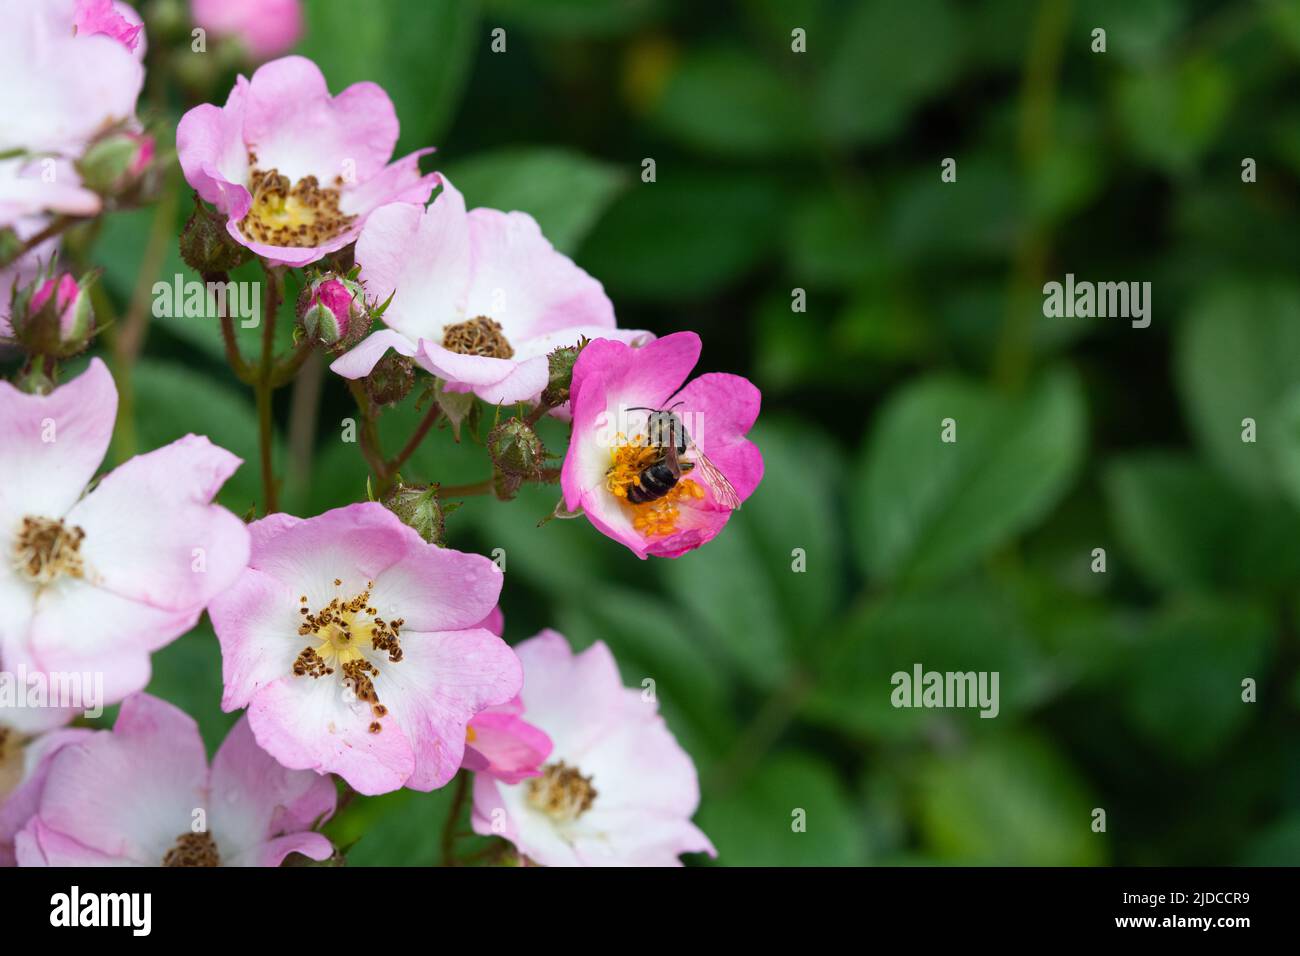 A bee collects pollen from a dog-rose at cloudy spring day Stock Photo